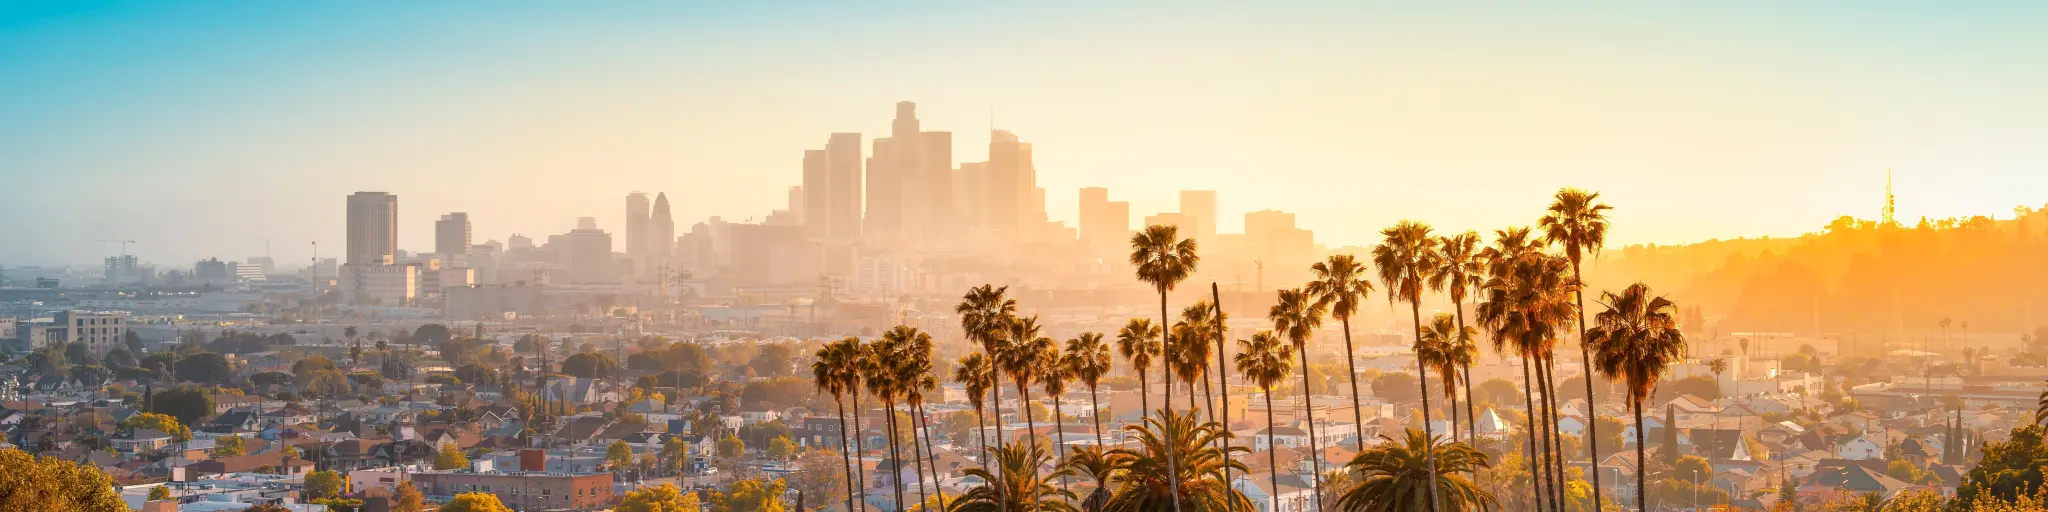 Skyline of LA during sunset with tall palm trees in the foreground